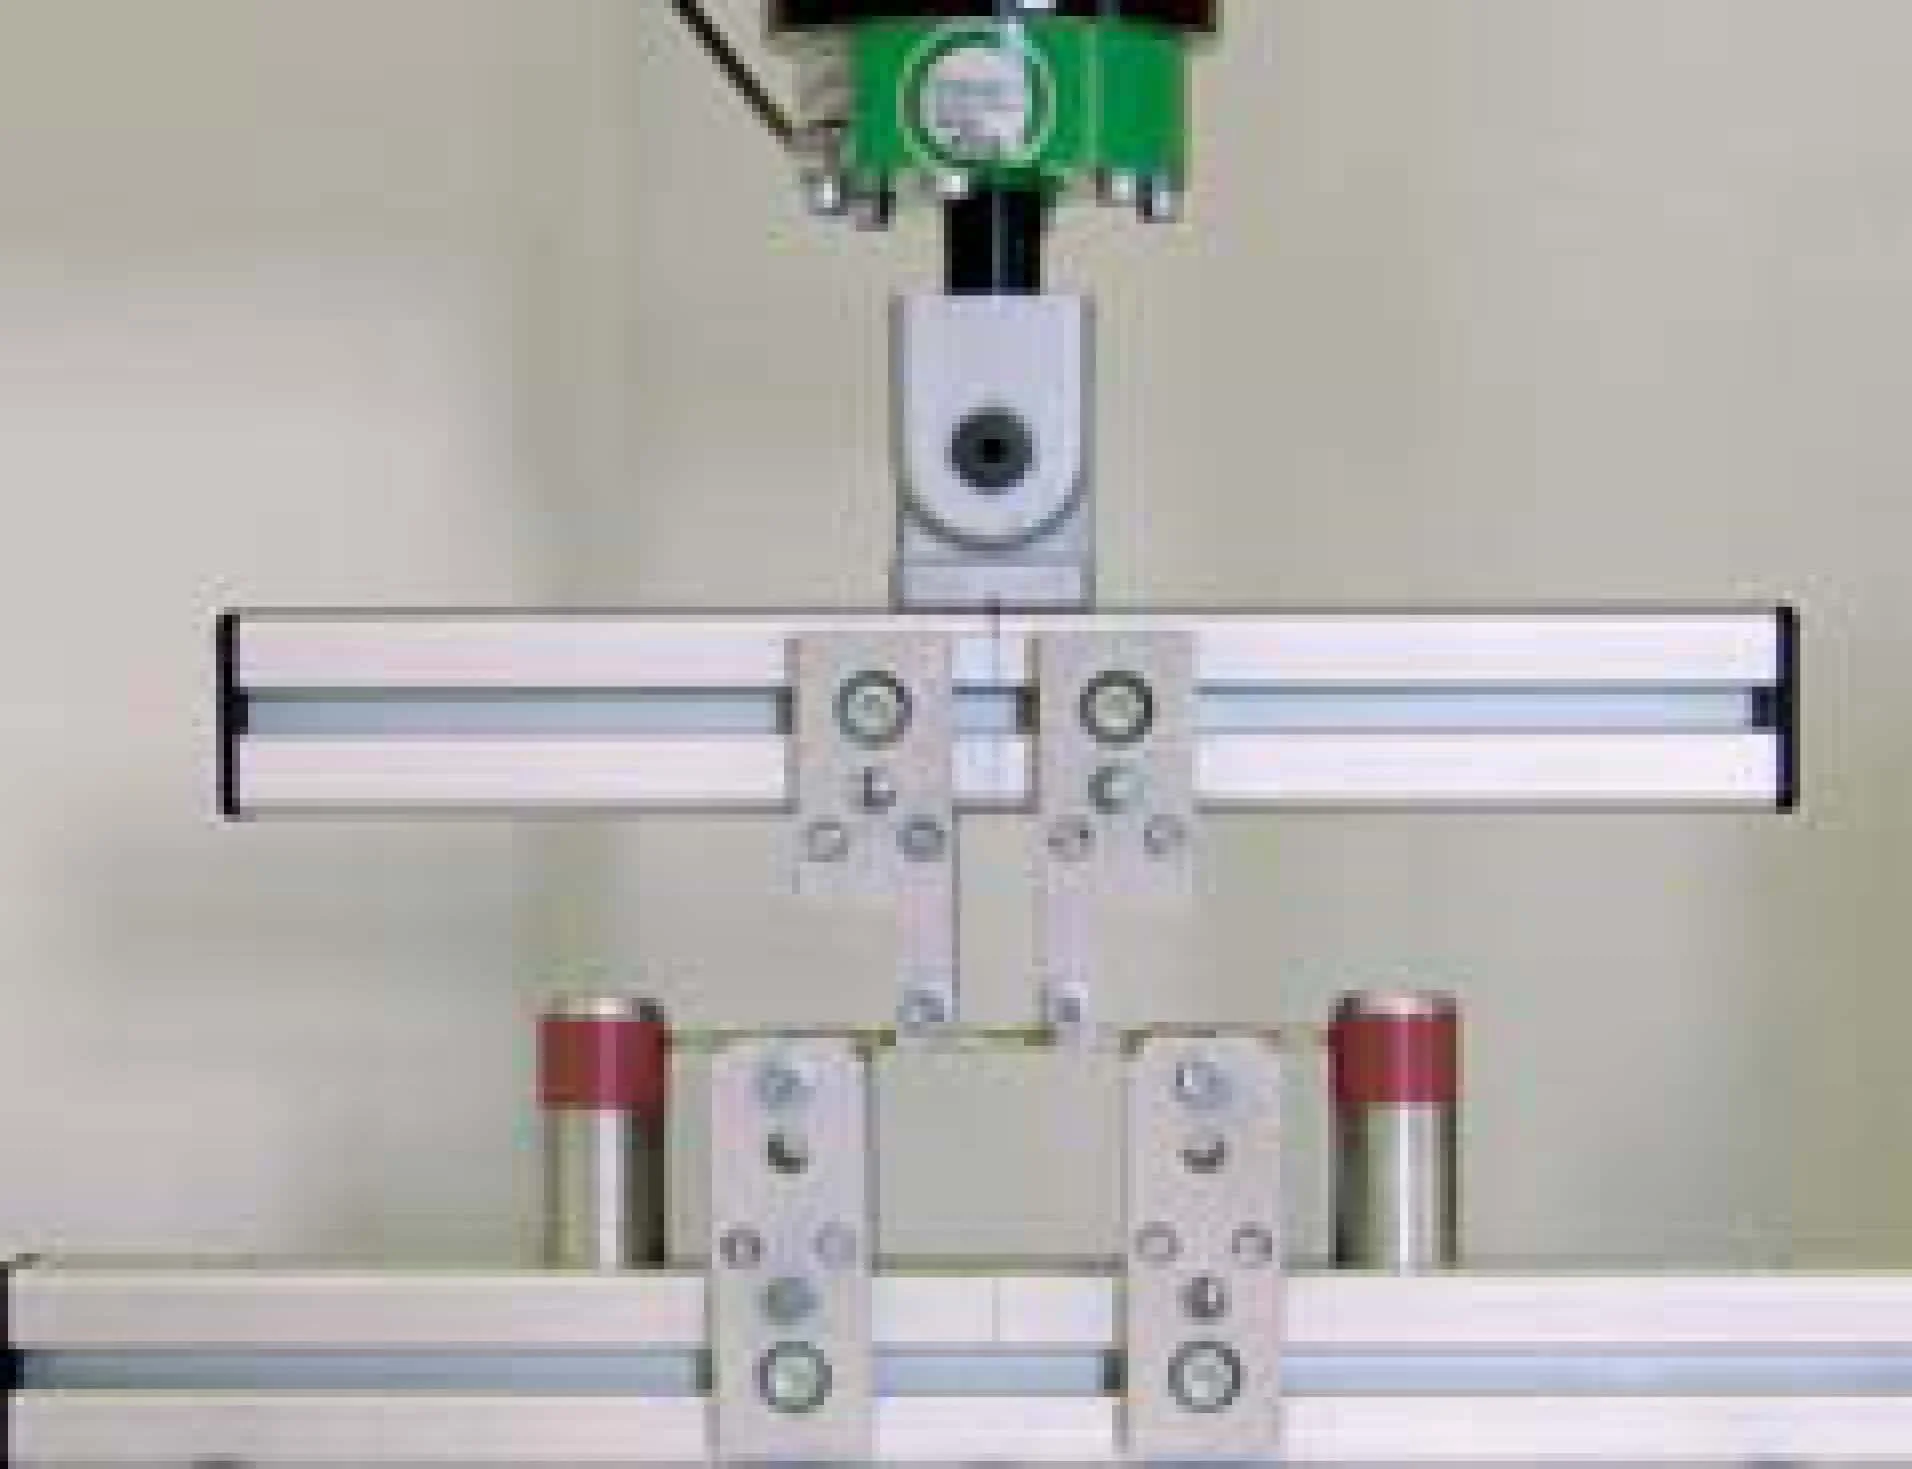 Osteosynthesis test setup for ASTM F382 and ASTM F3437 by Questmed GmbH